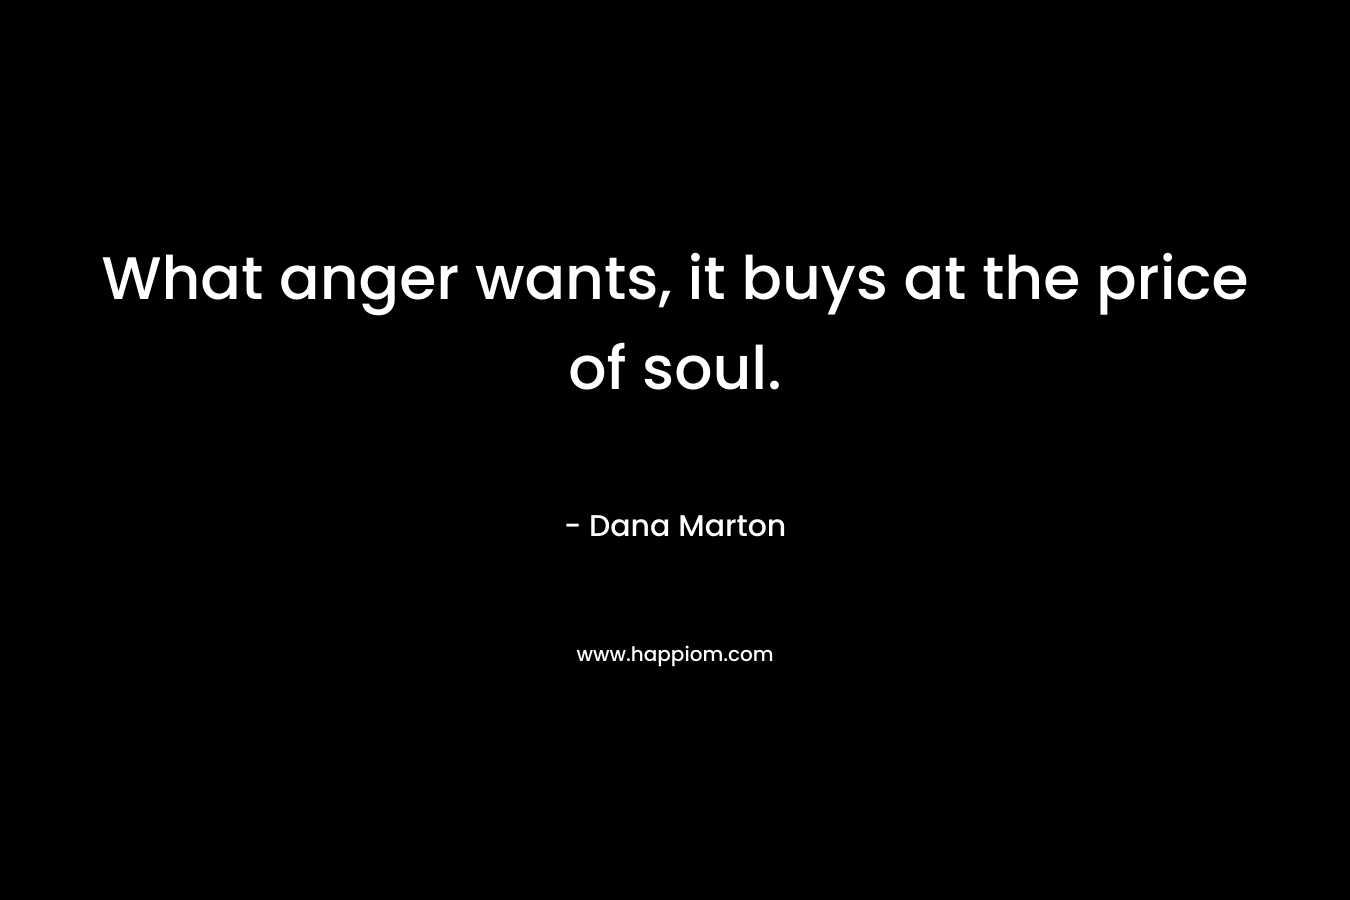 What anger wants, it buys at the price of soul.